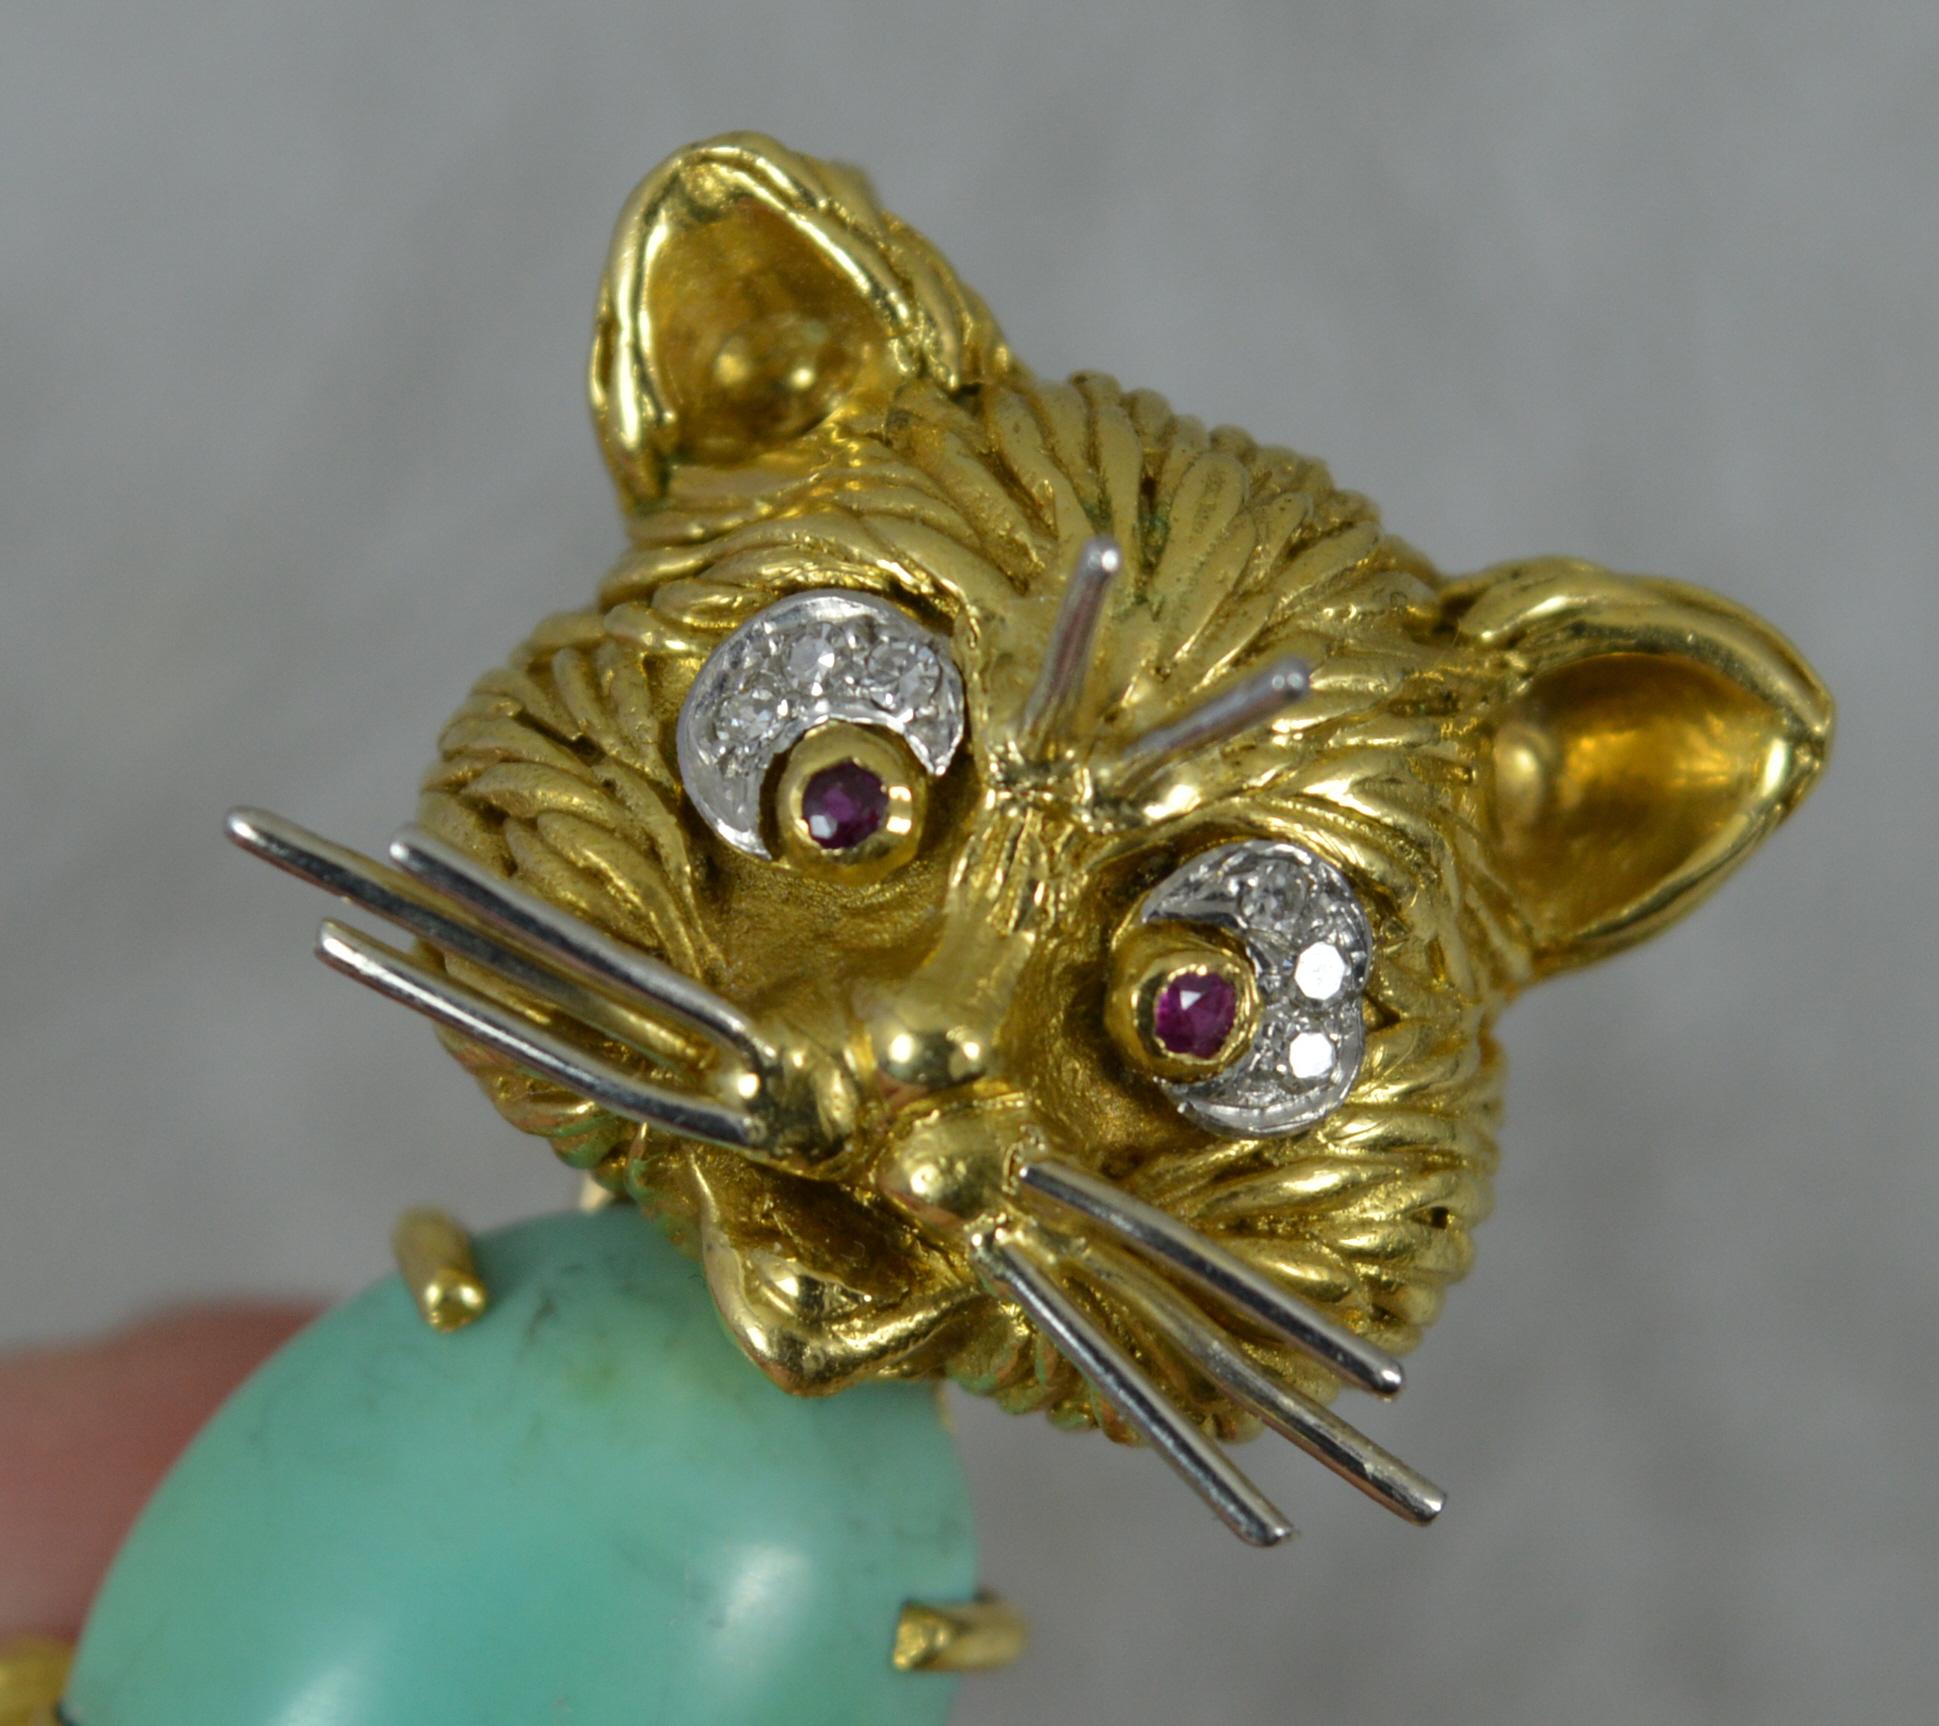 A captivating English made vintage brooch.
A solid 18 carat yellow gold example of whimsical cat form with white gold whiskers.
Designed with a large oval turquoise to the body, ruby stones set for eyes and diamonds set above.
Made by Ben